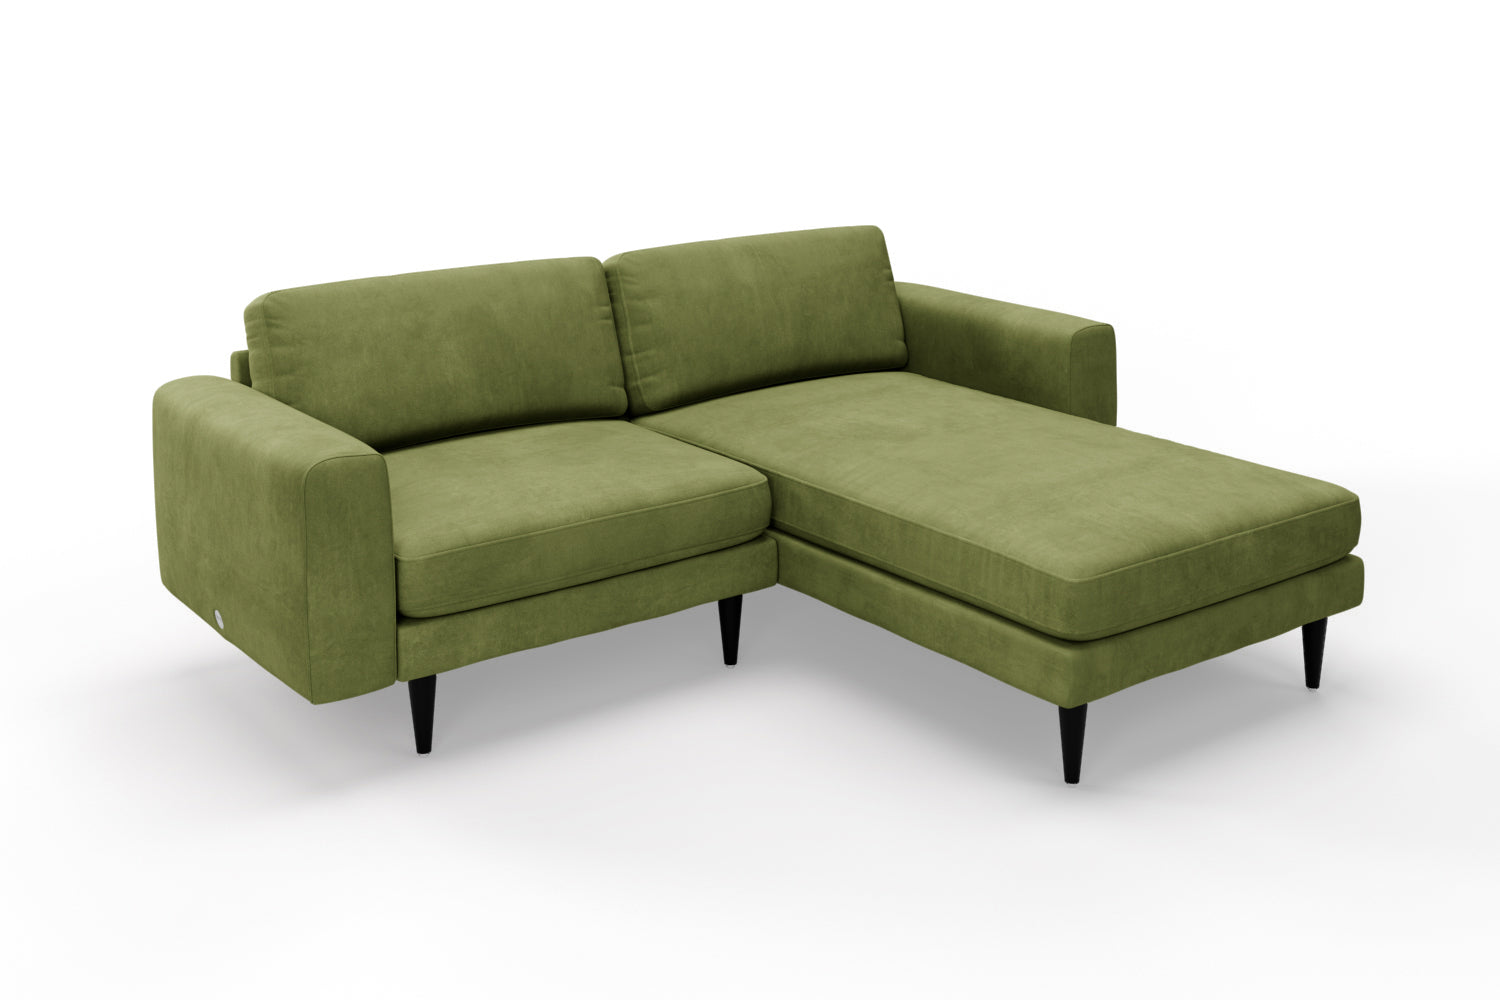 SNUG | The Big Chill Right Hand Chaise Sofa in Olive